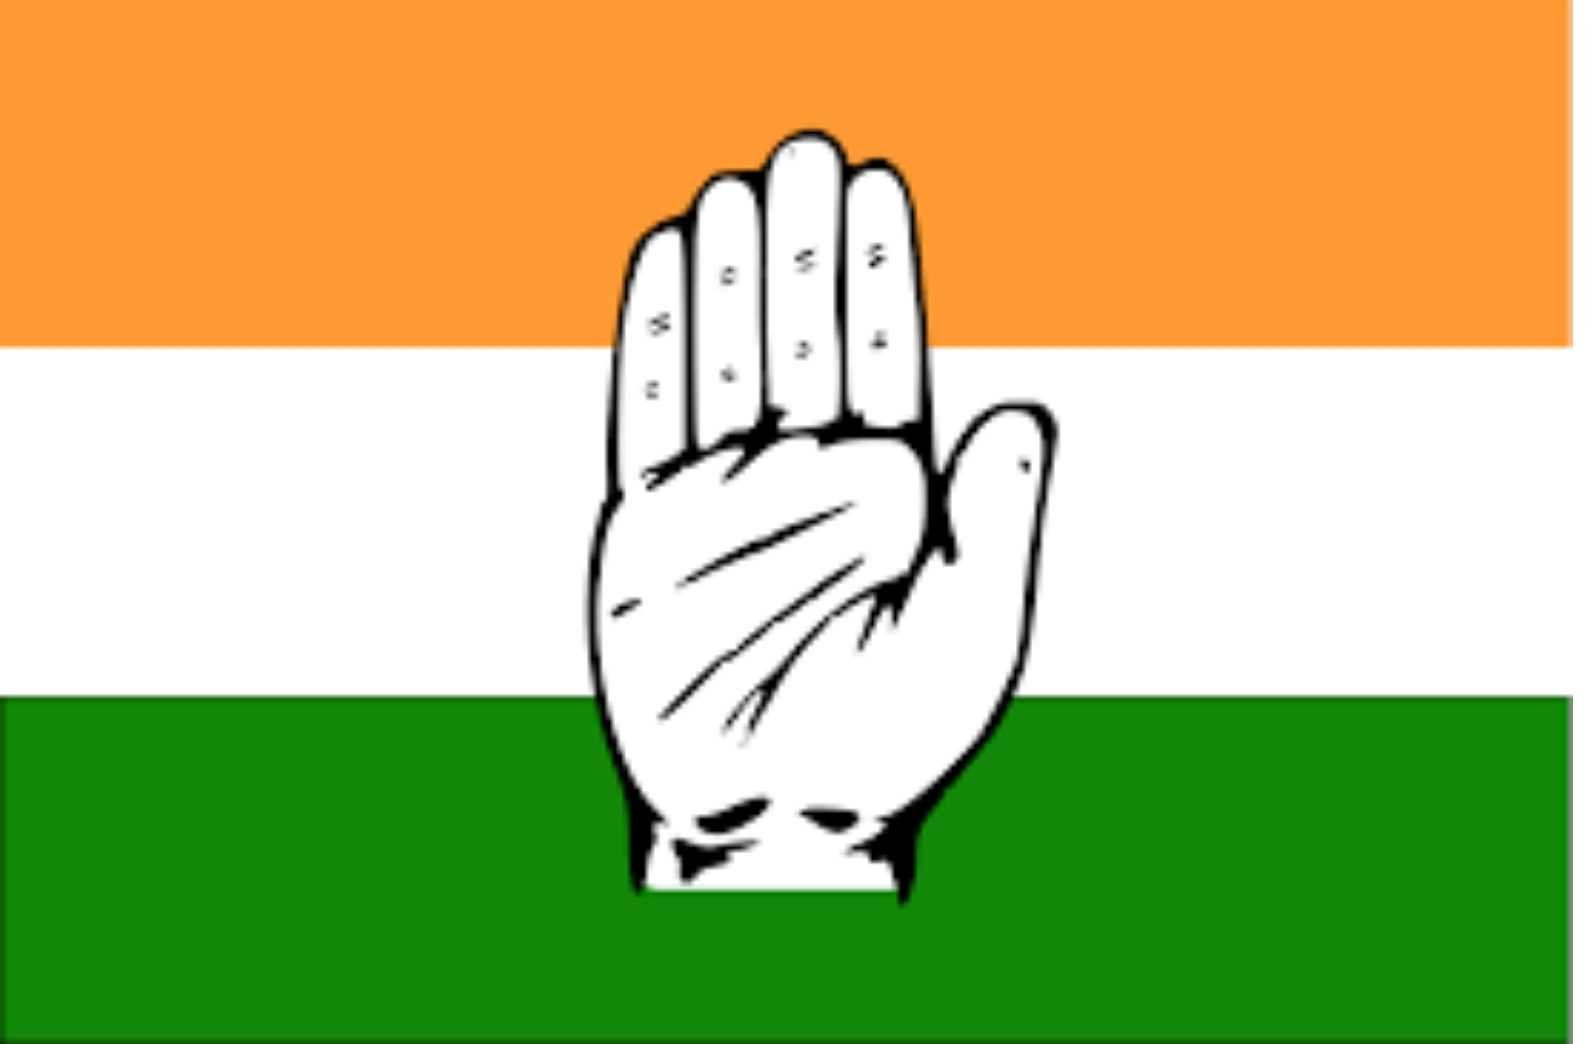 लोकसभा |Congress in the elections of 2019